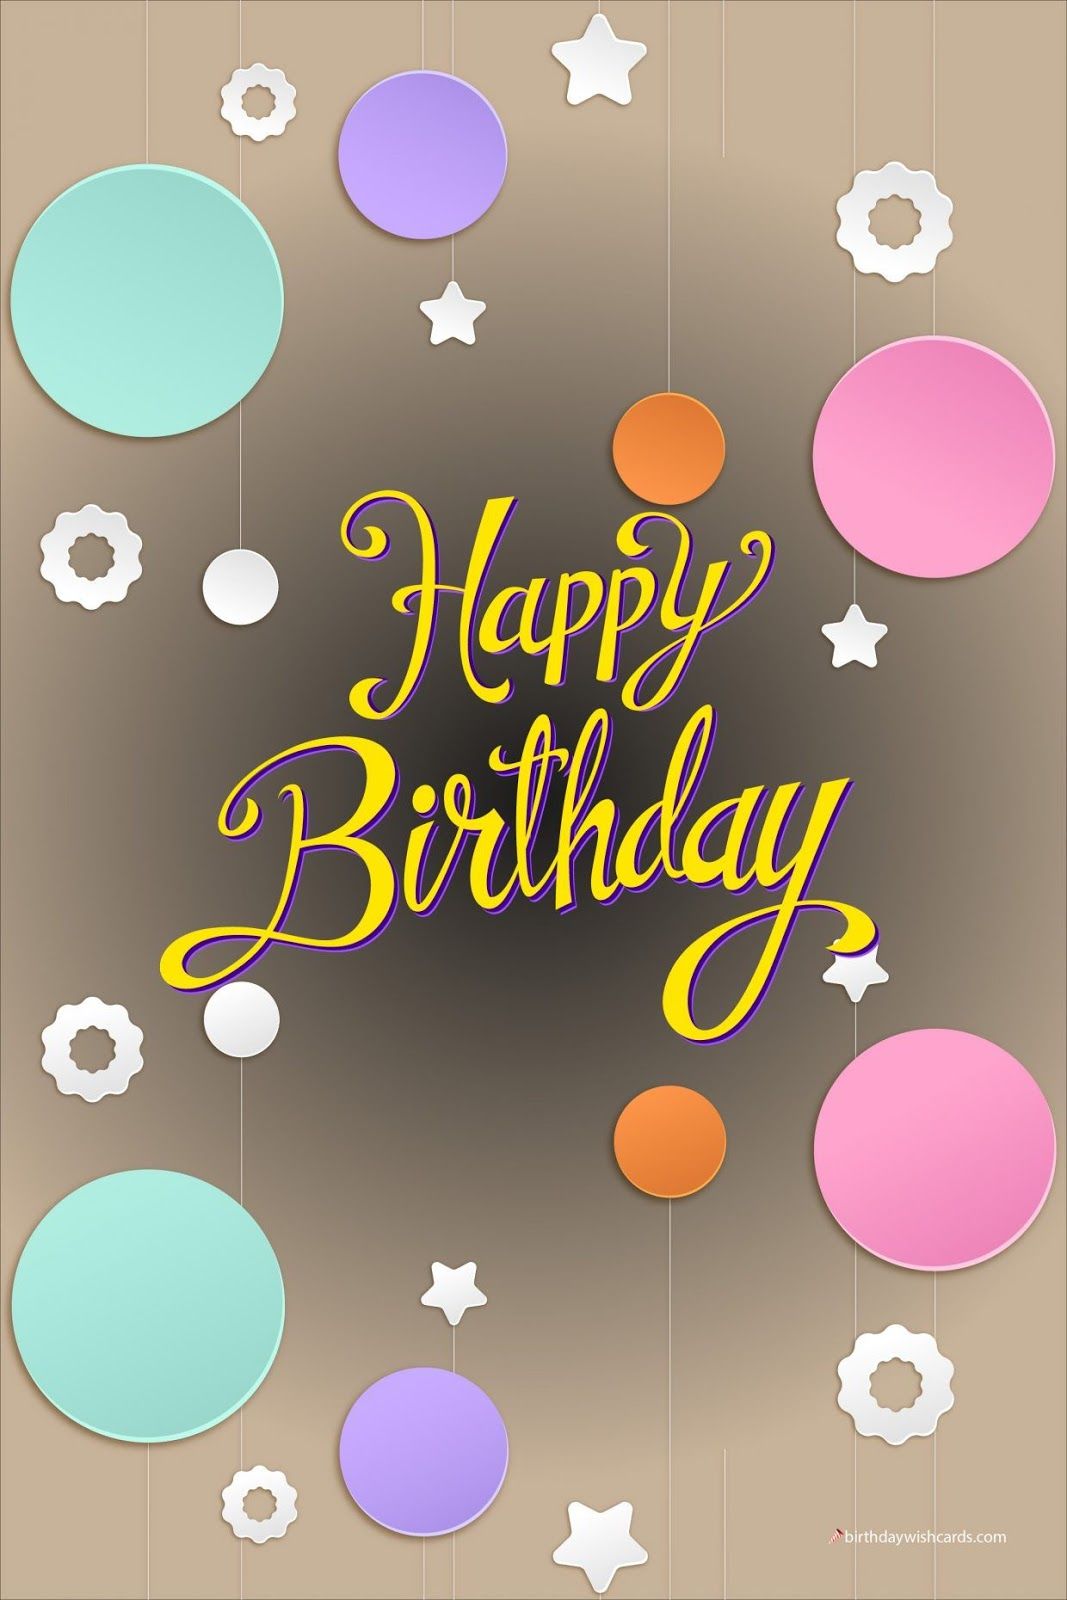 Happy Birthday Wallpaper (2020) HD Image With Wishes Free Download. Happy Birthday 2020